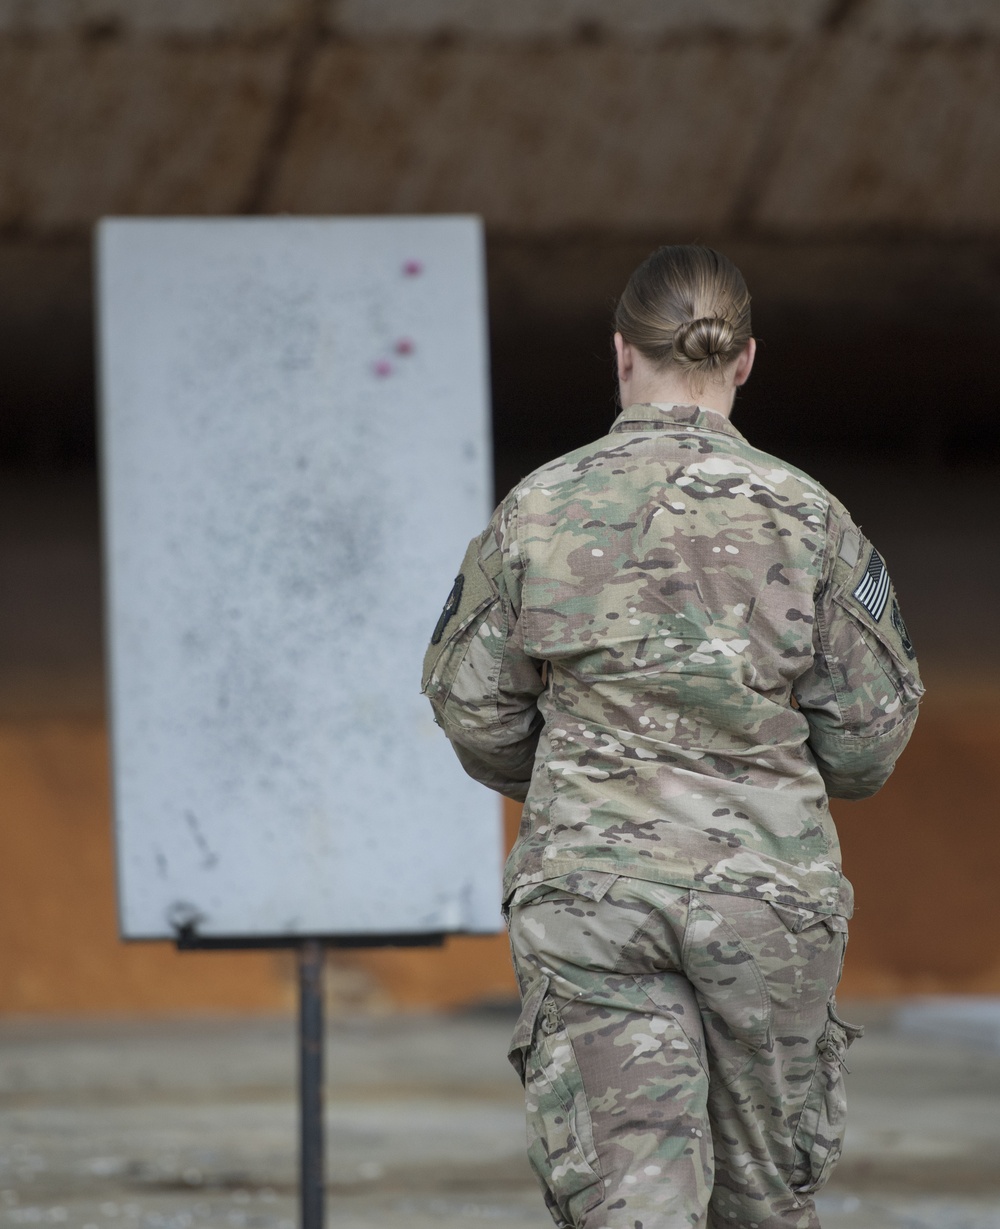 Ready, aim, fire! CATM training helps qualify Airmen in weapons proficiency